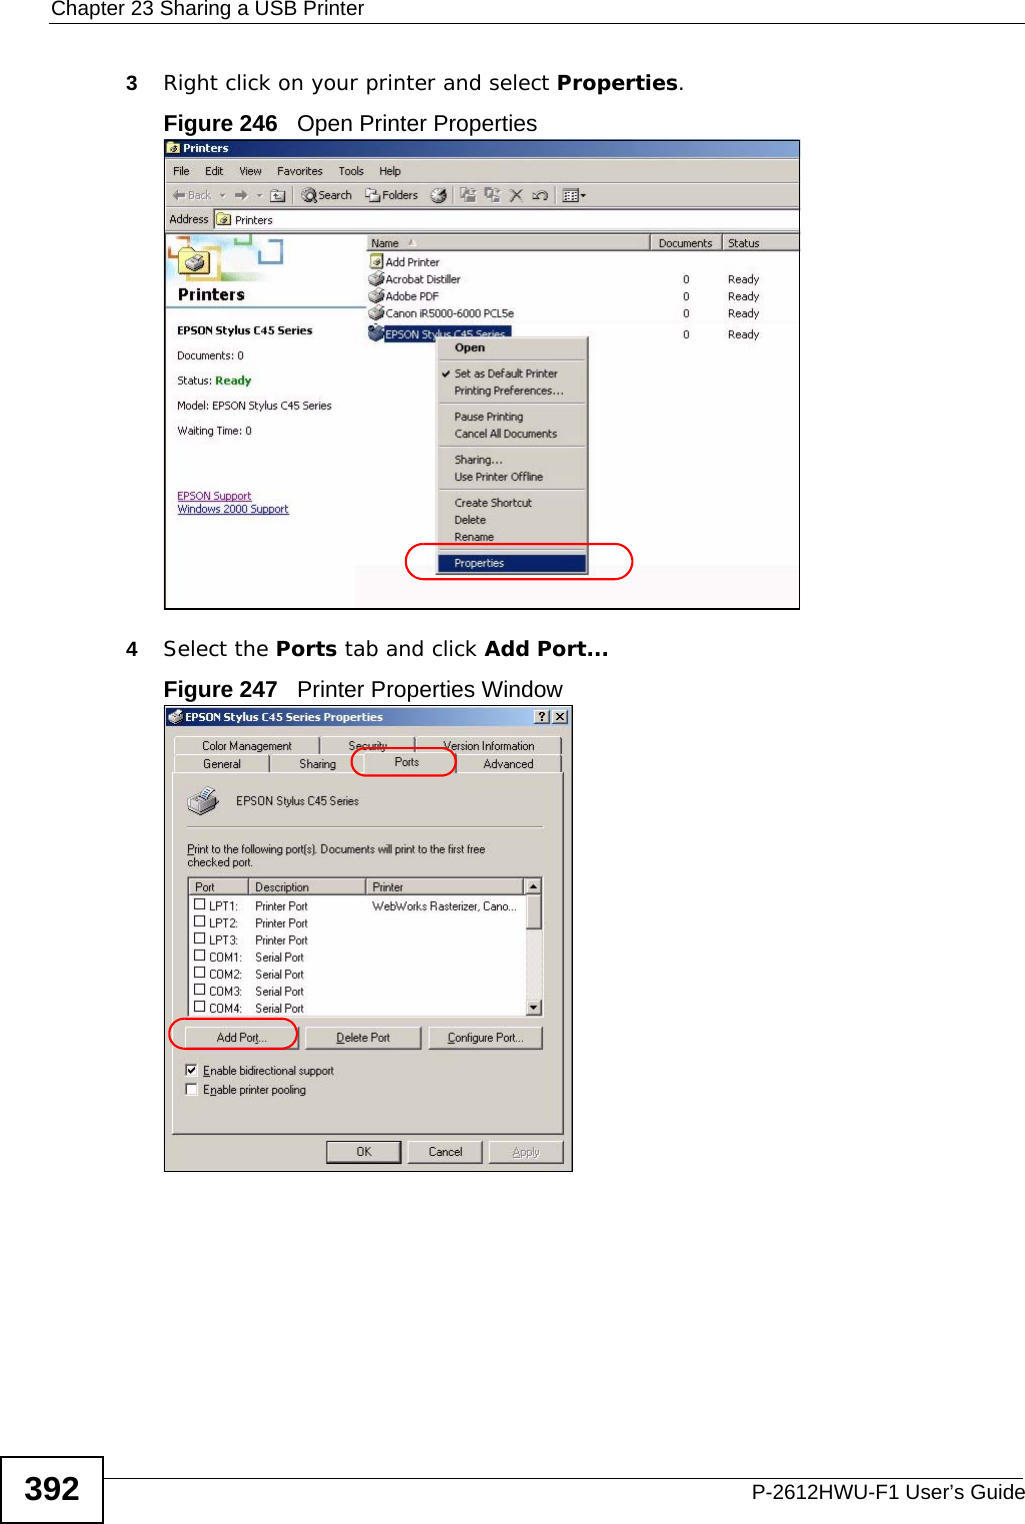 Chapter 23 Sharing a USB PrinterP-2612HWU-F1 User’s Guide3923Right click on your printer and select Properties.Figure 246   Open Printer Properties4Select the Ports tab and click Add Port...Figure 247   Printer Properties Window